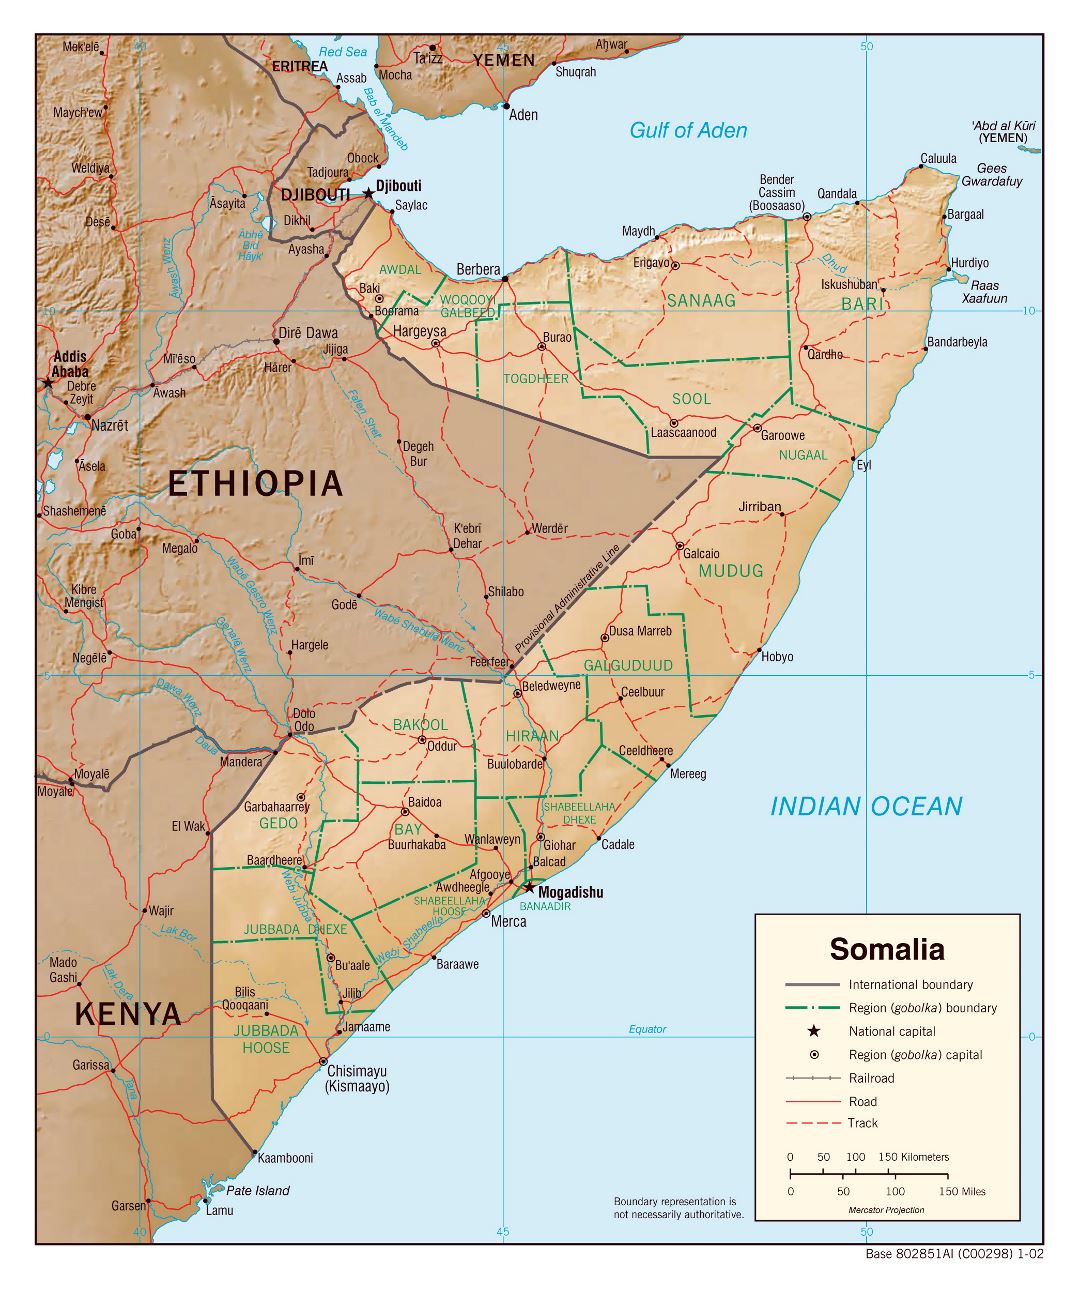 Large political and administrative map of Somalia with relief, roads, railroads and major cities - 2002